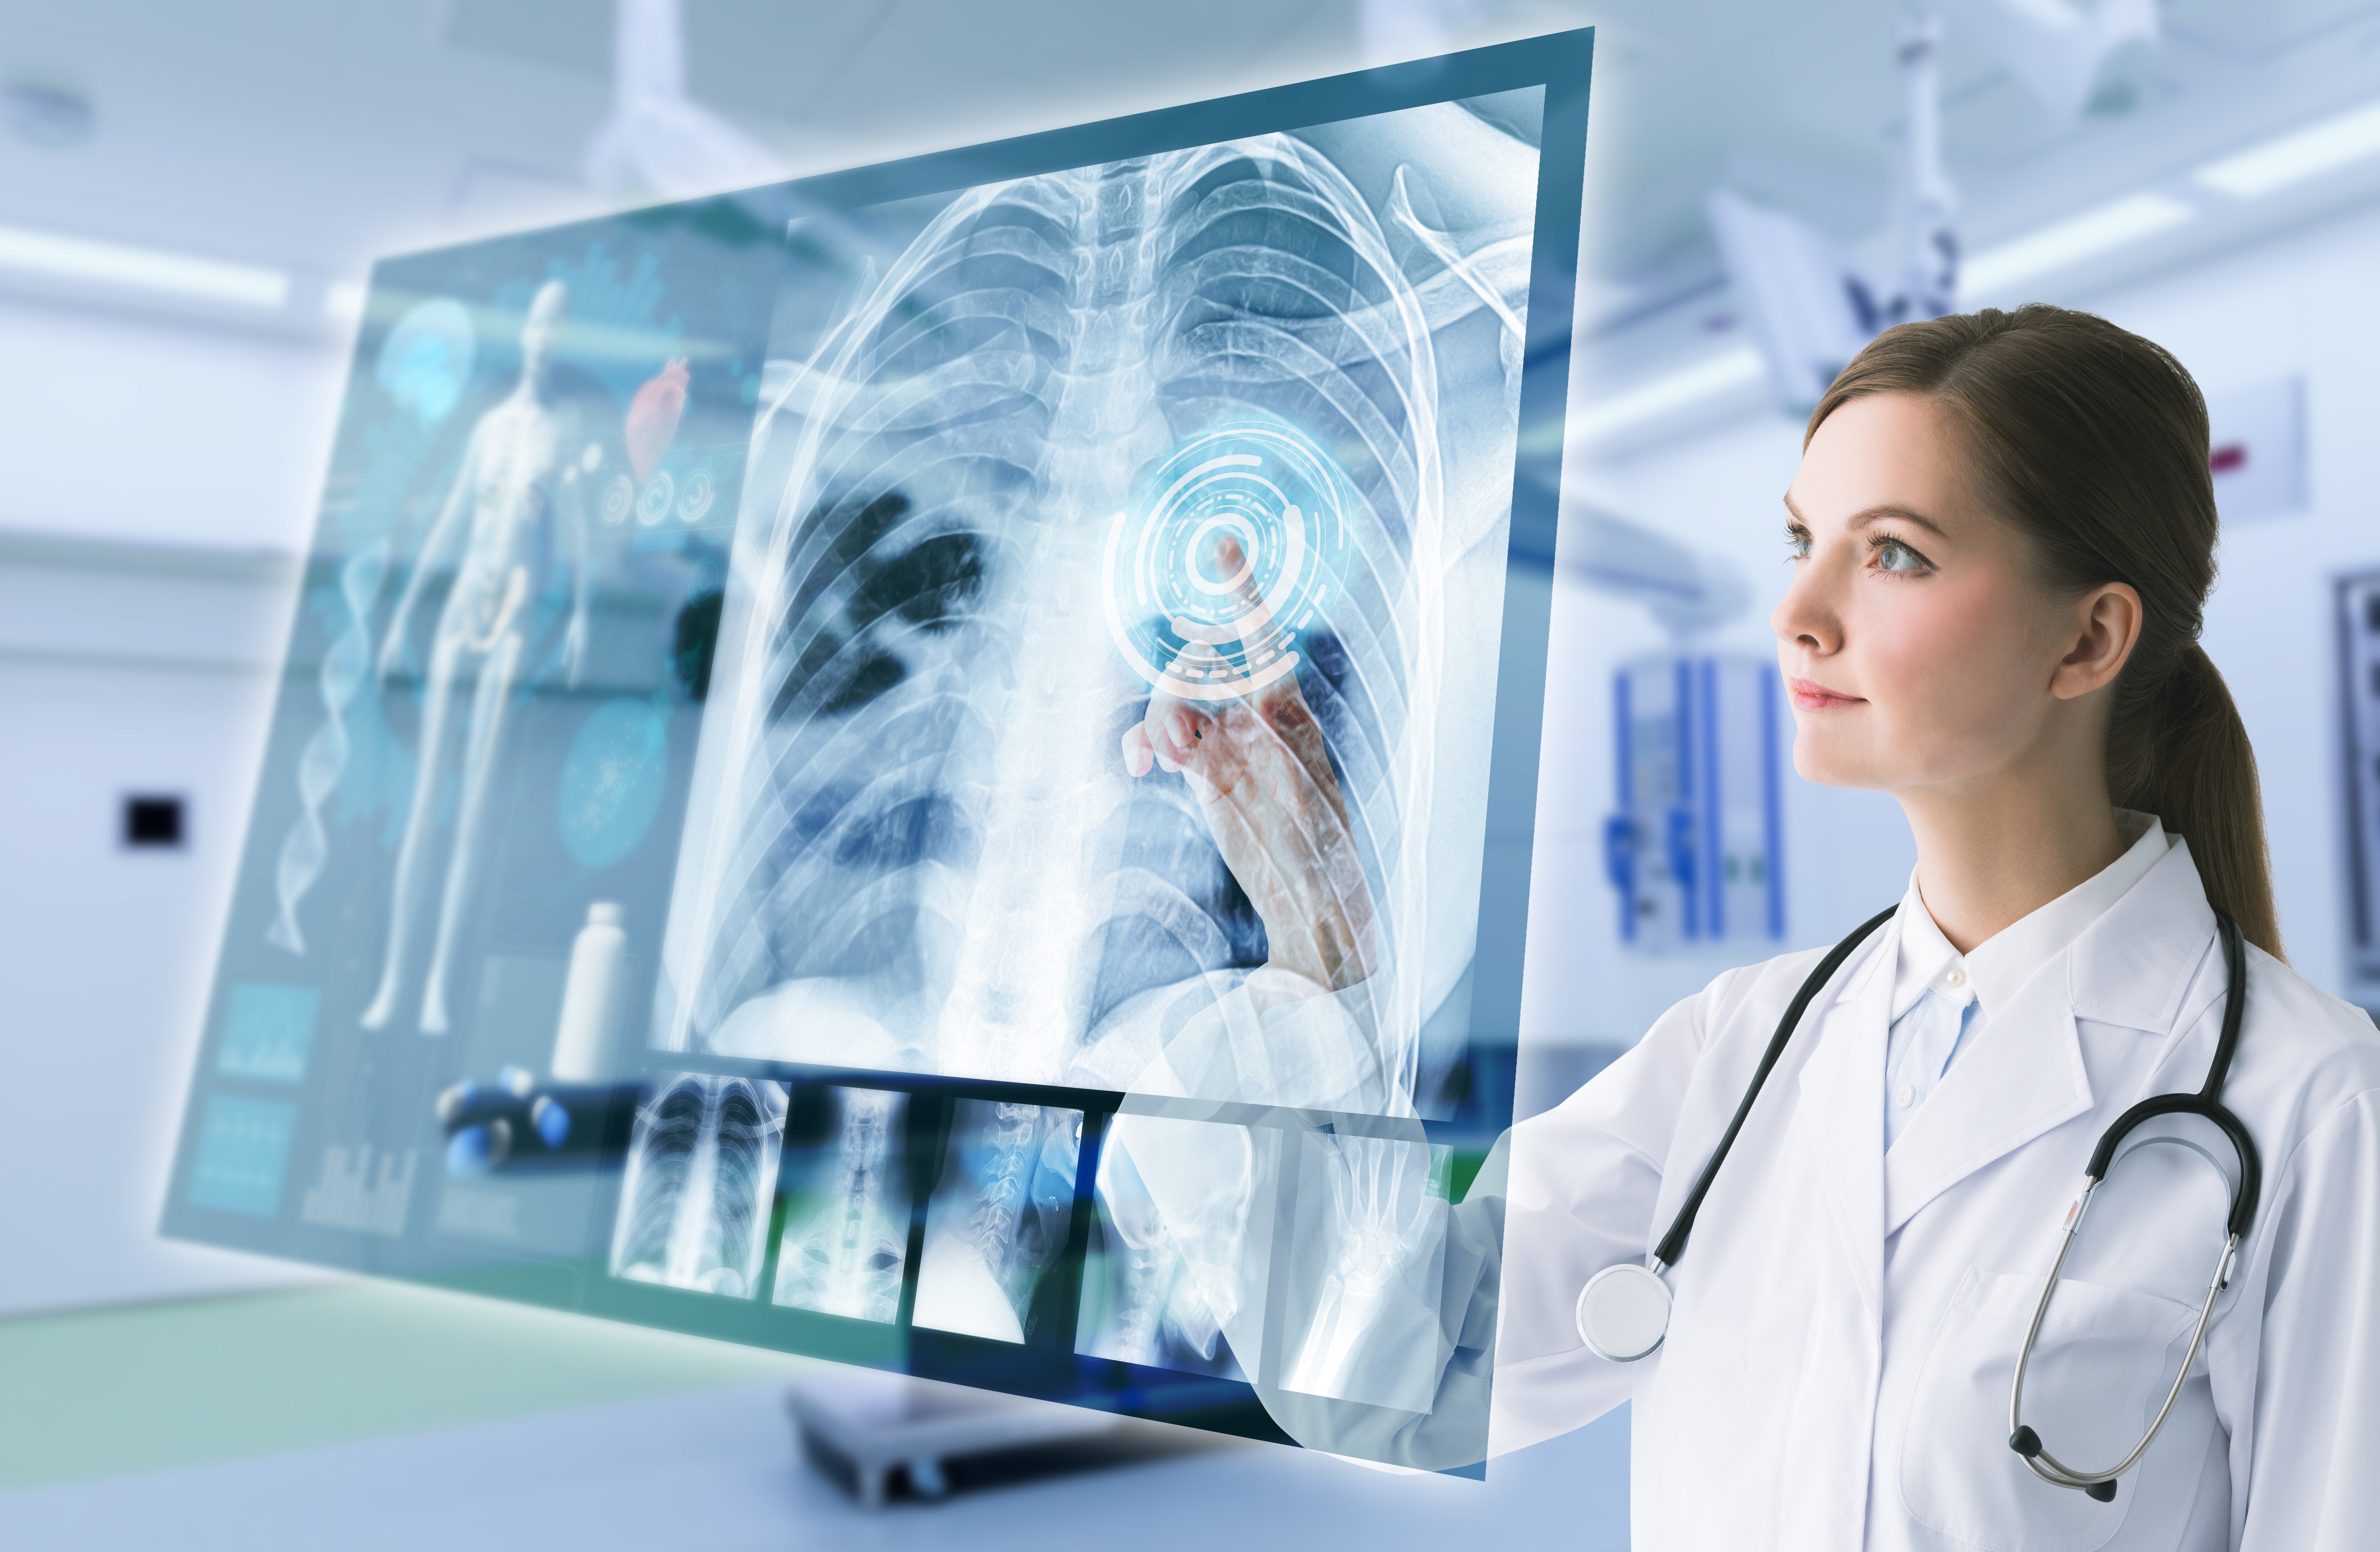 The alliance of the IoT, machine learning and cloud technology is at the service of healthcare organizations, ready to assist them in optimizing  the workflows.